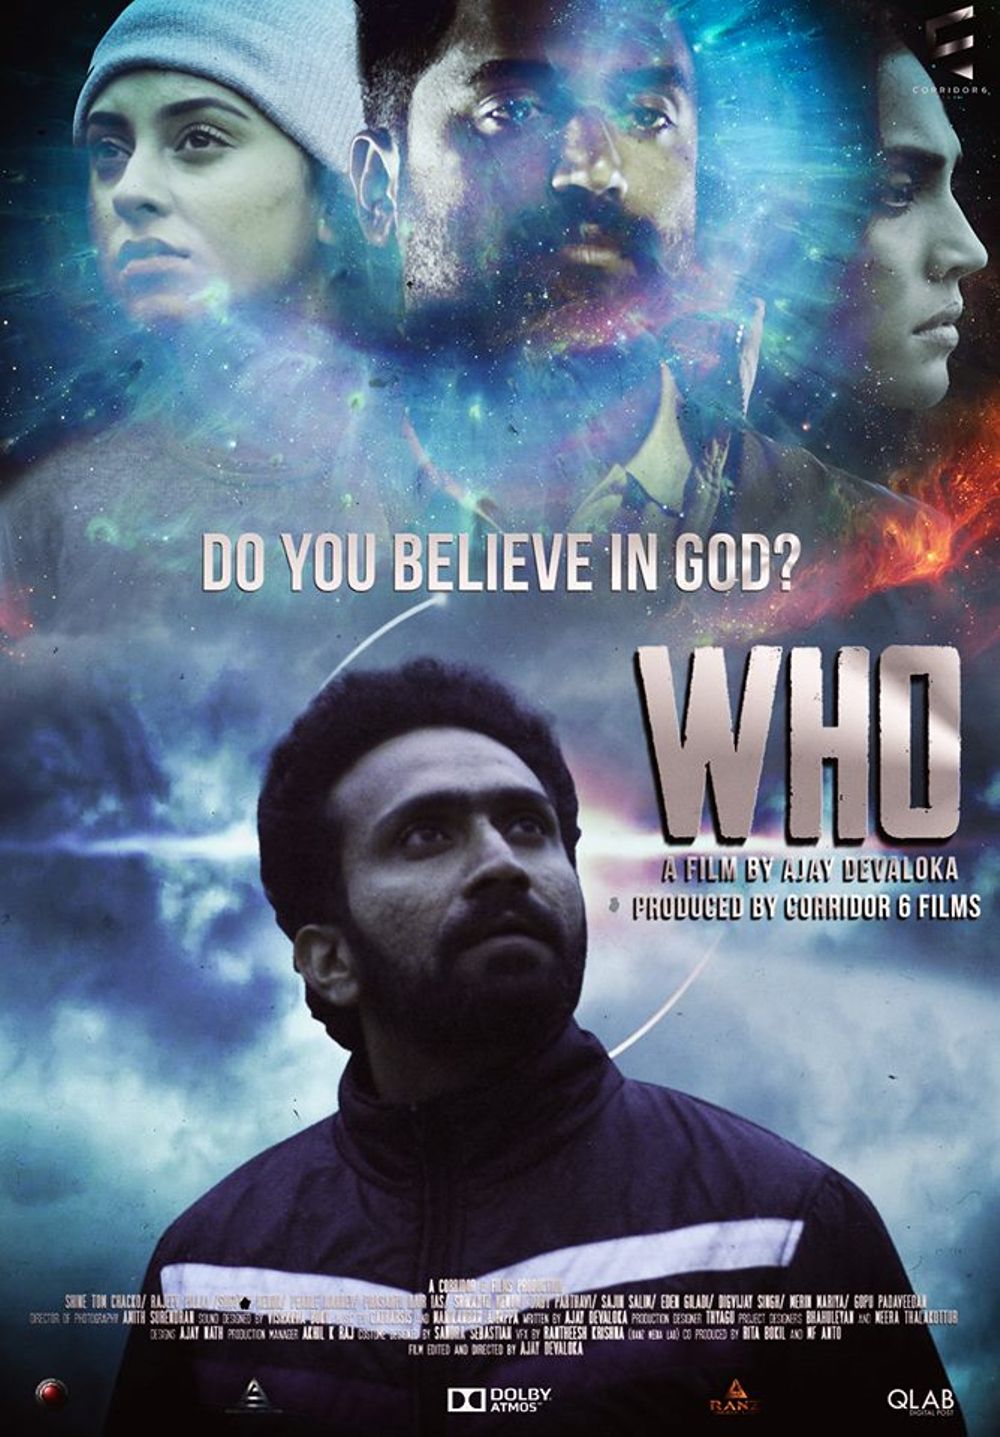 WHO Movie Review